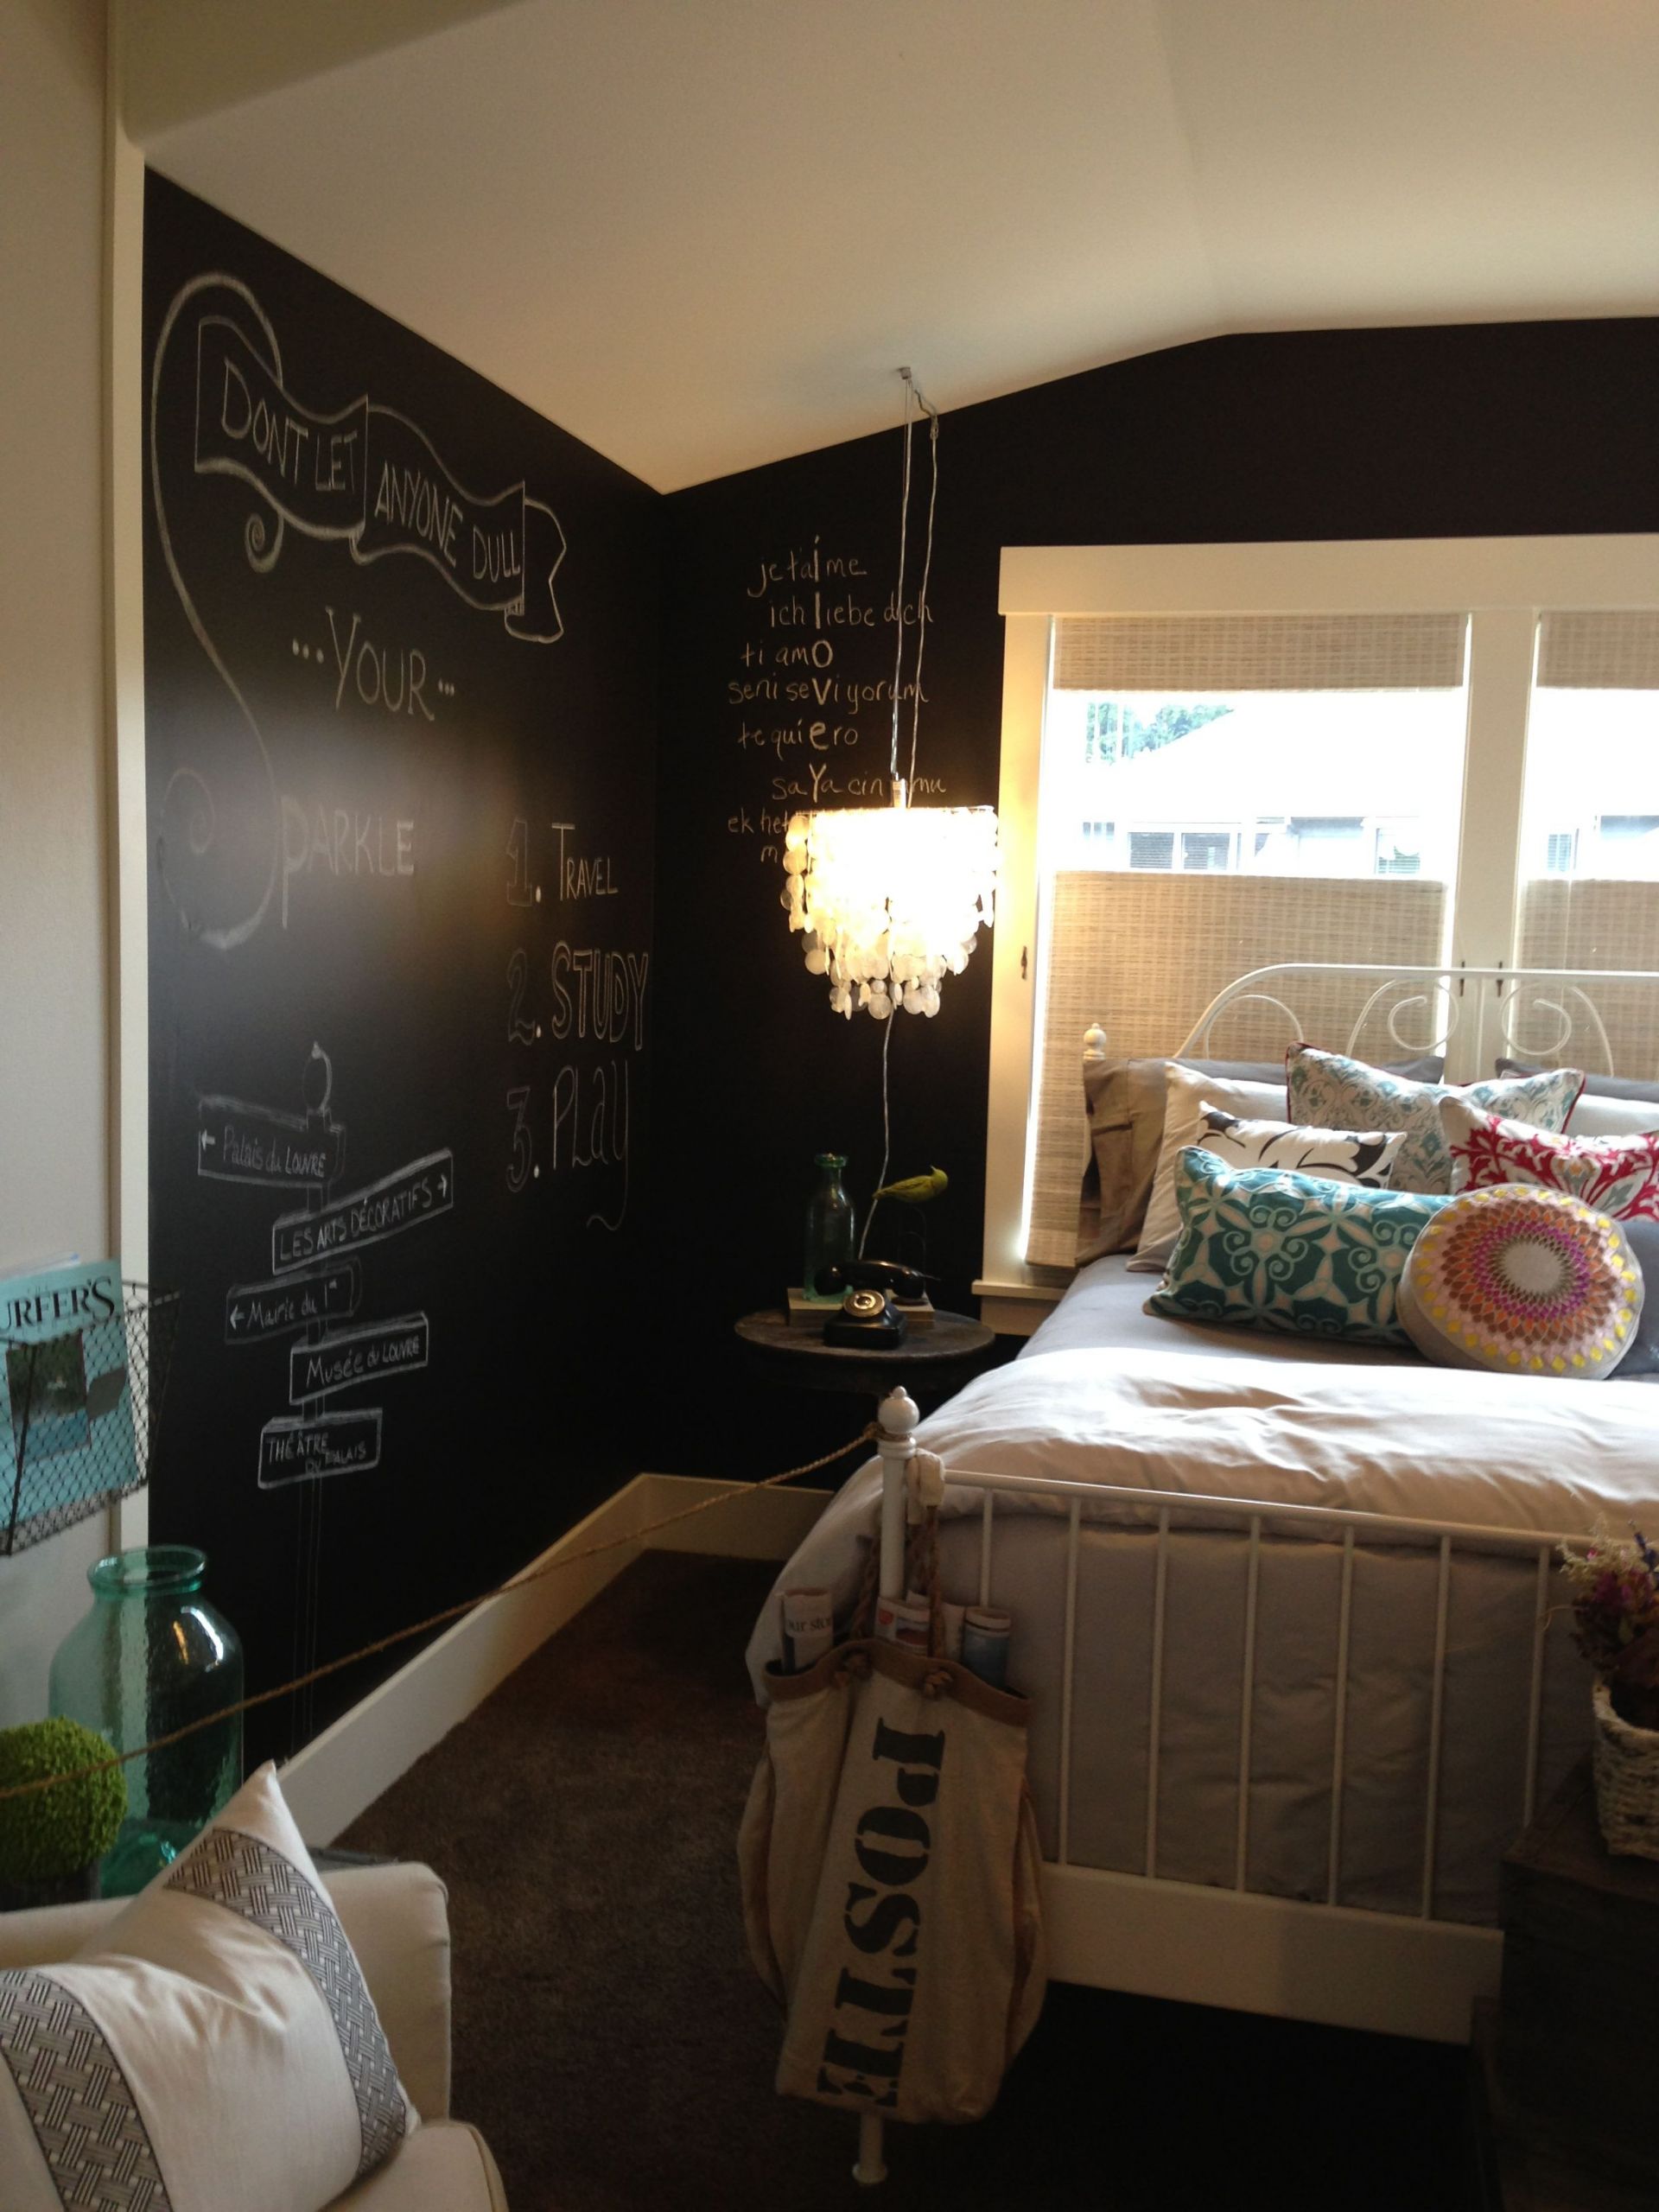 Chalkboard Paint Ideas Bedroom
 Paint one wall or all of them with chalkboard paint Fun